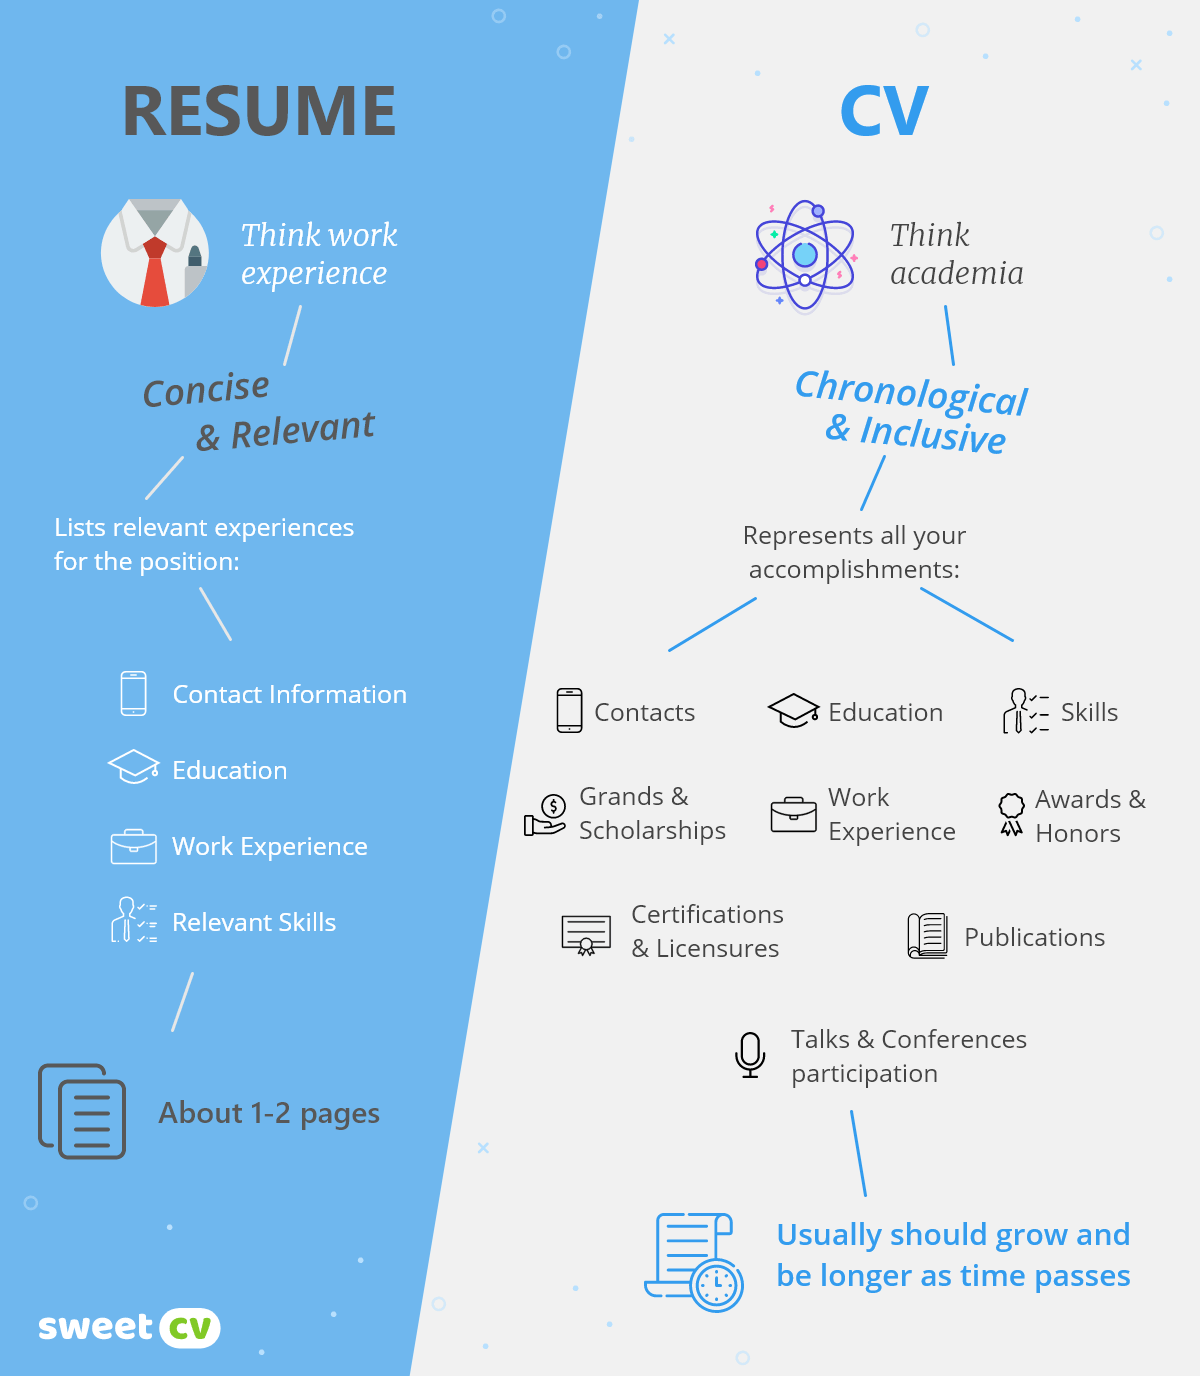 Why Most People Will Never Be Great At Resume